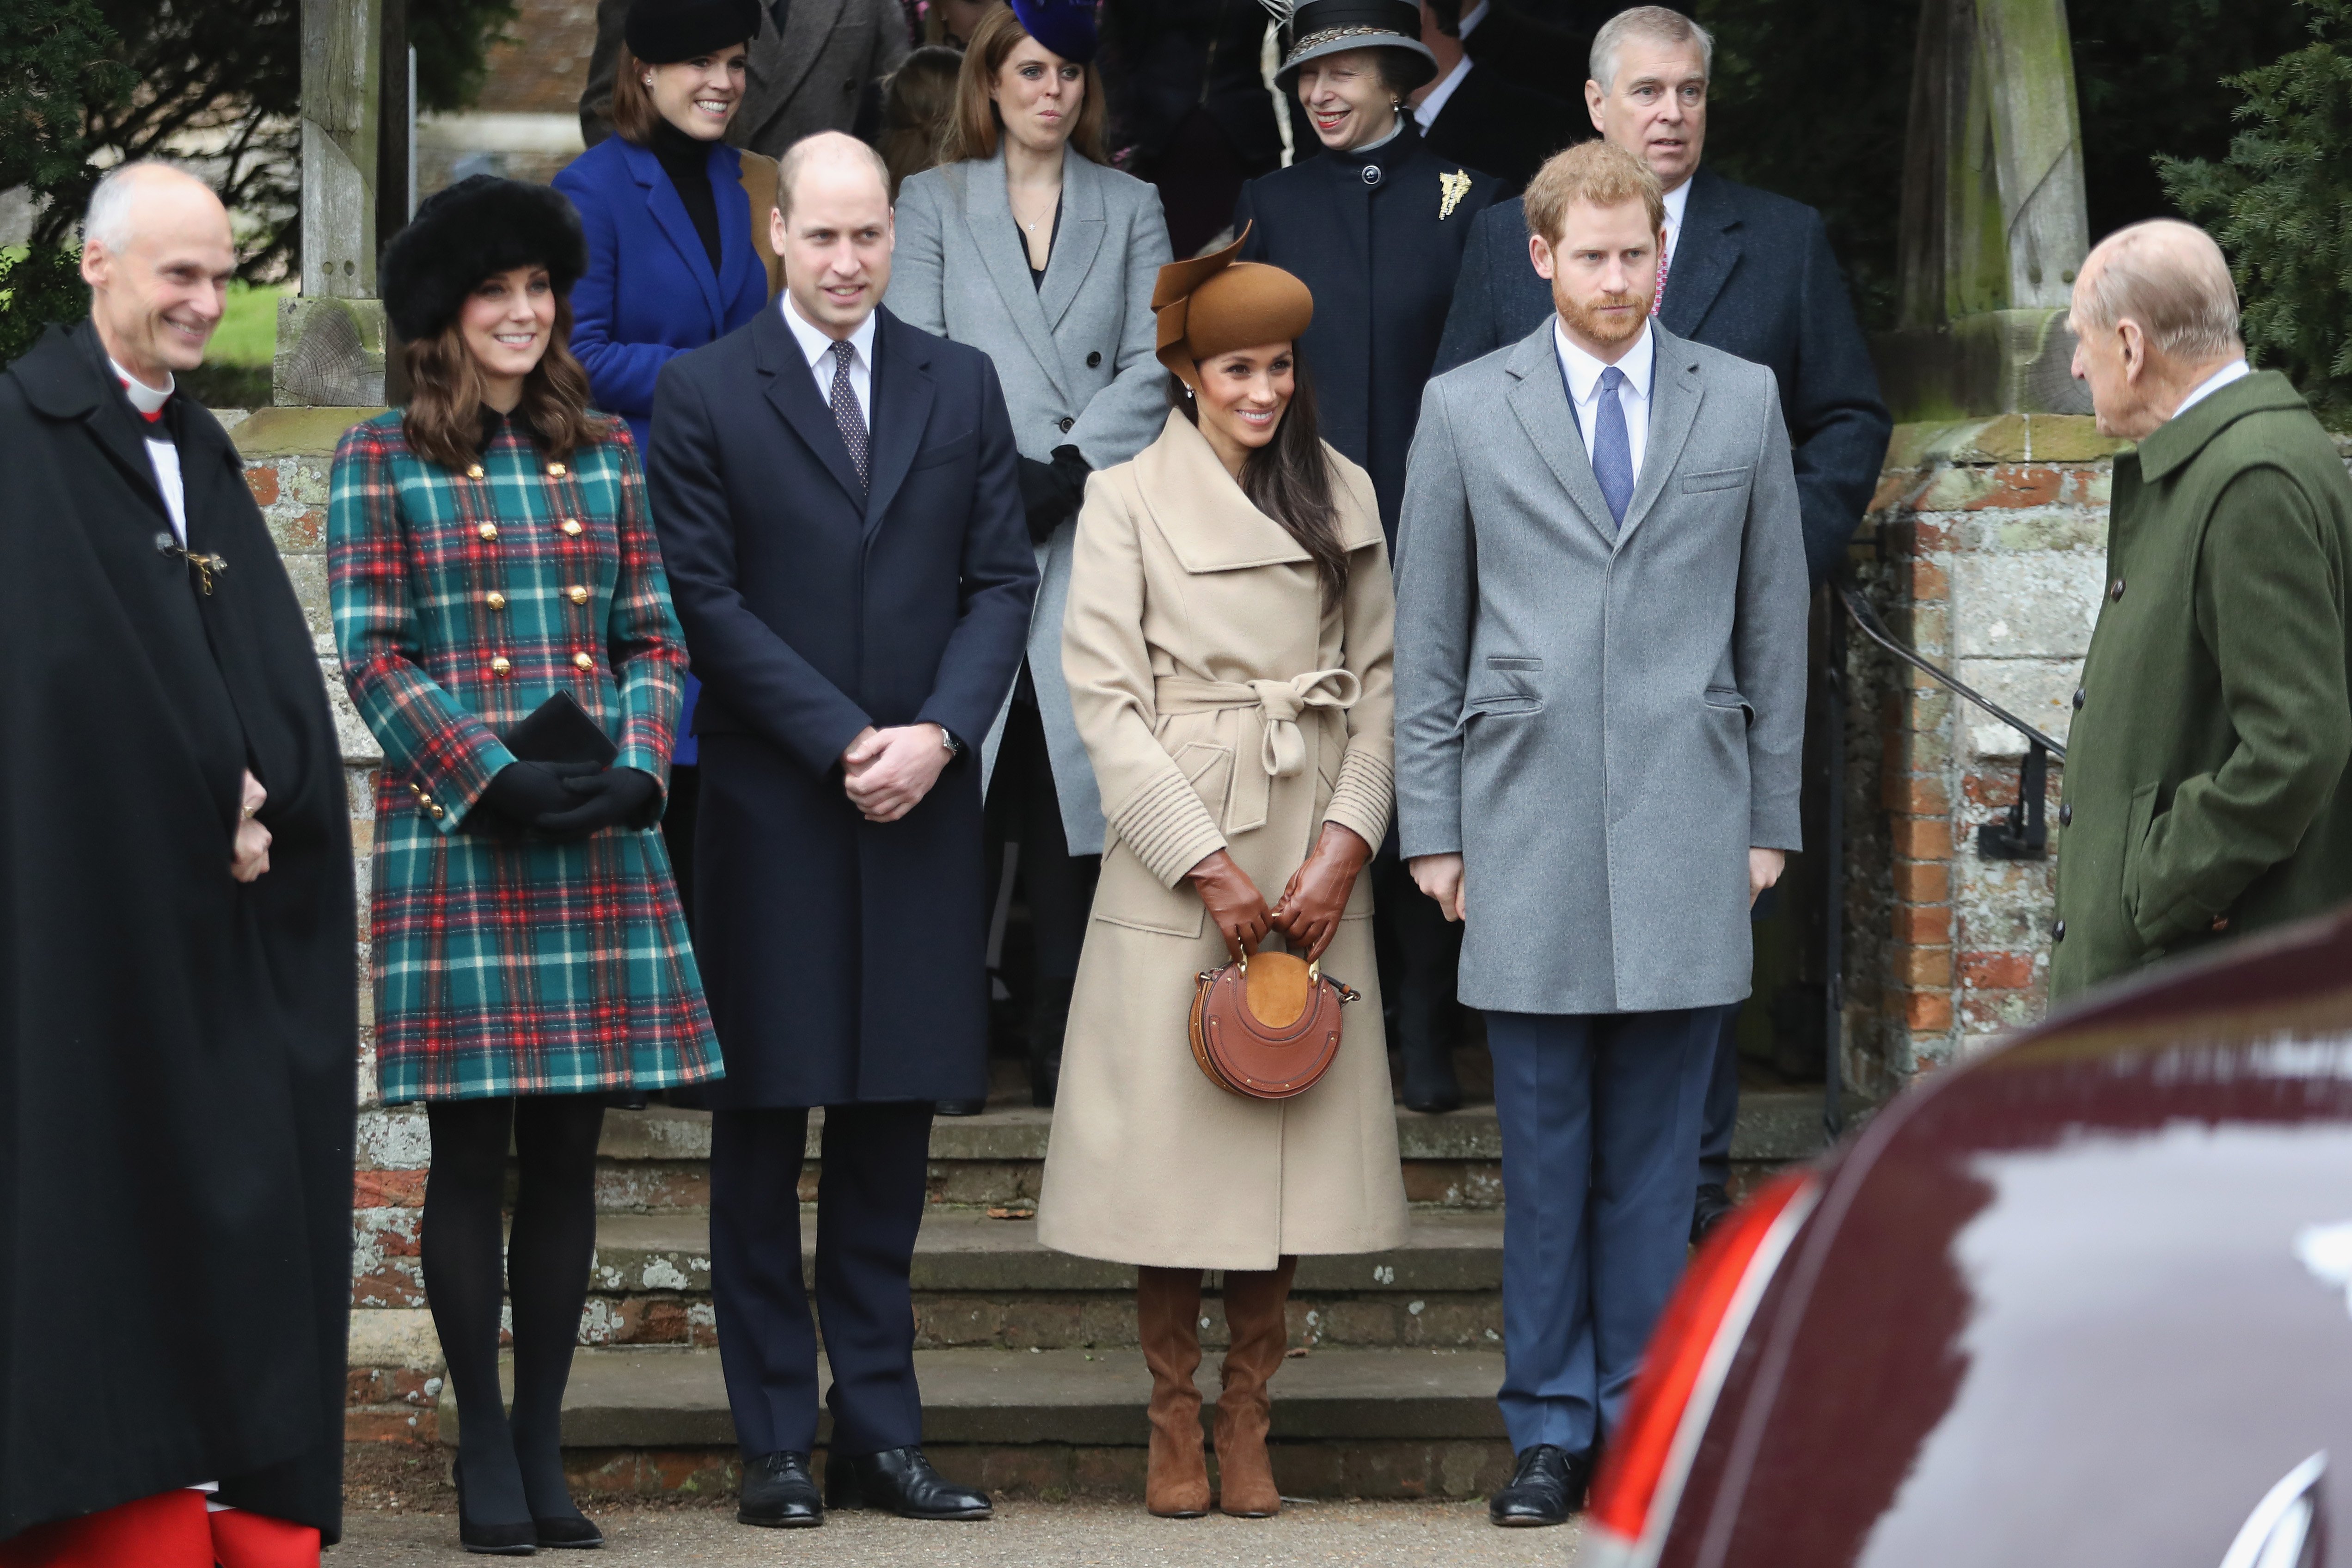 Princess Beatrice, Princess Eugenie, Princess Anne, Princess Royal, Prince Andrew, Duke of York, Prince William, Duke of Cambridge, Prince Philip, Duke of Edinburgh, Catherine, Duchess of Cambridge, Meghan Markle and Prince Harry attend Christmas Day Church service on December 25, 2017 in King's Lynn, England. |  Source: Getty Images 